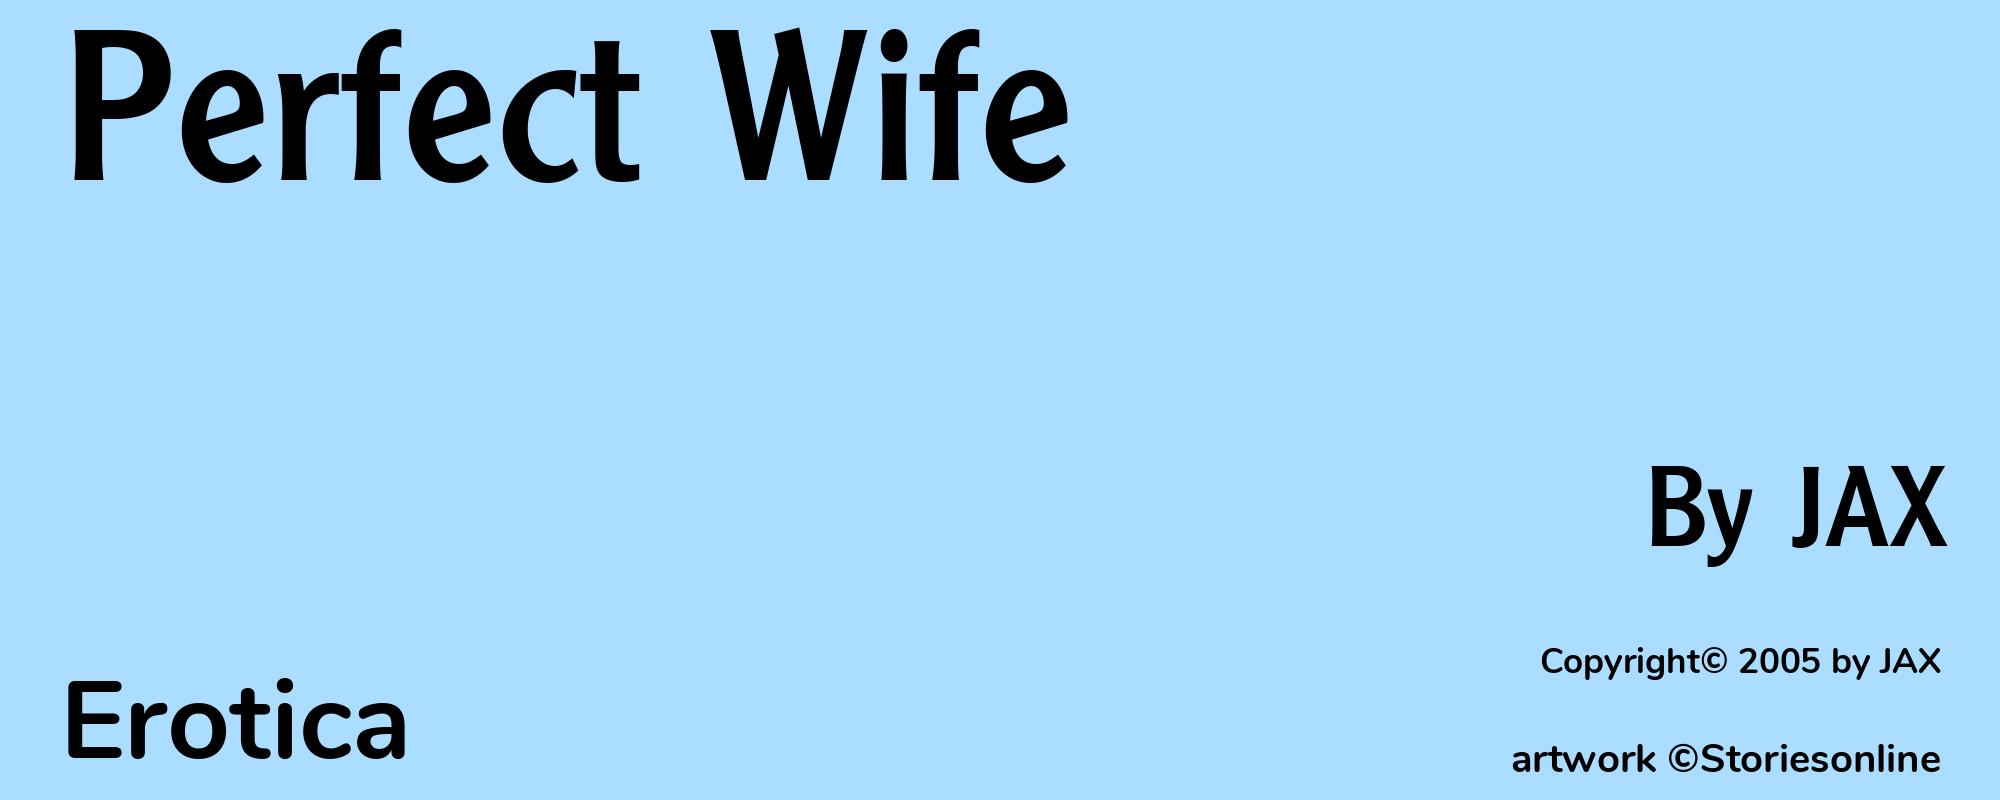 Perfect Wife - Cover